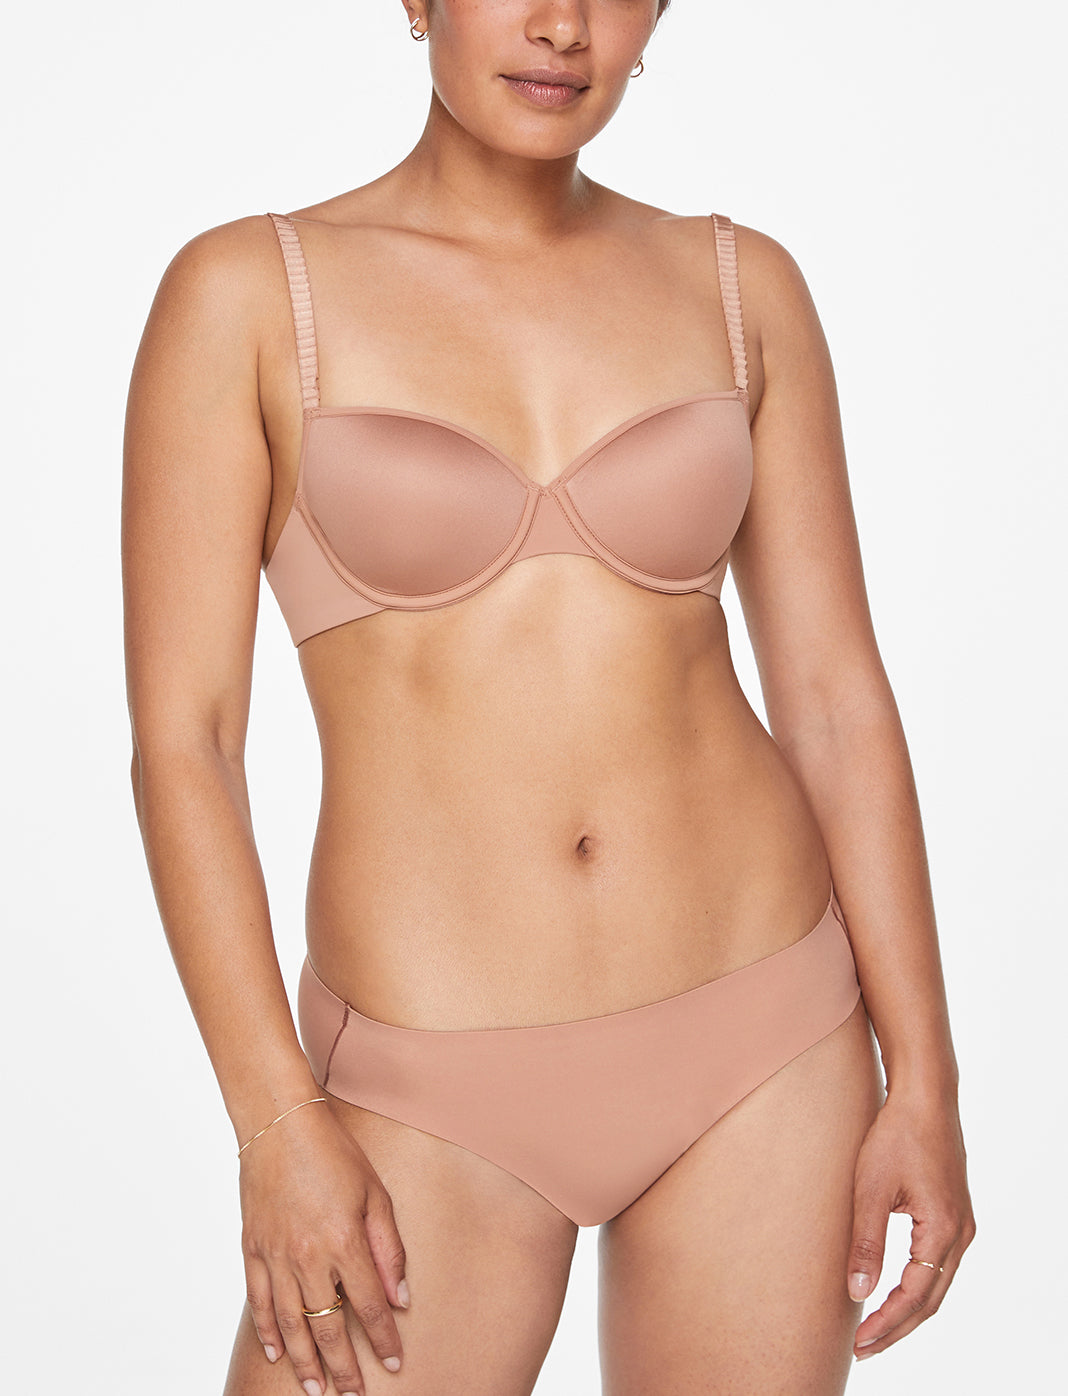 Thirdlove 24/7 Classic T Shirt Bra Deep Espresso 40D Size undefined - $40 -  From W